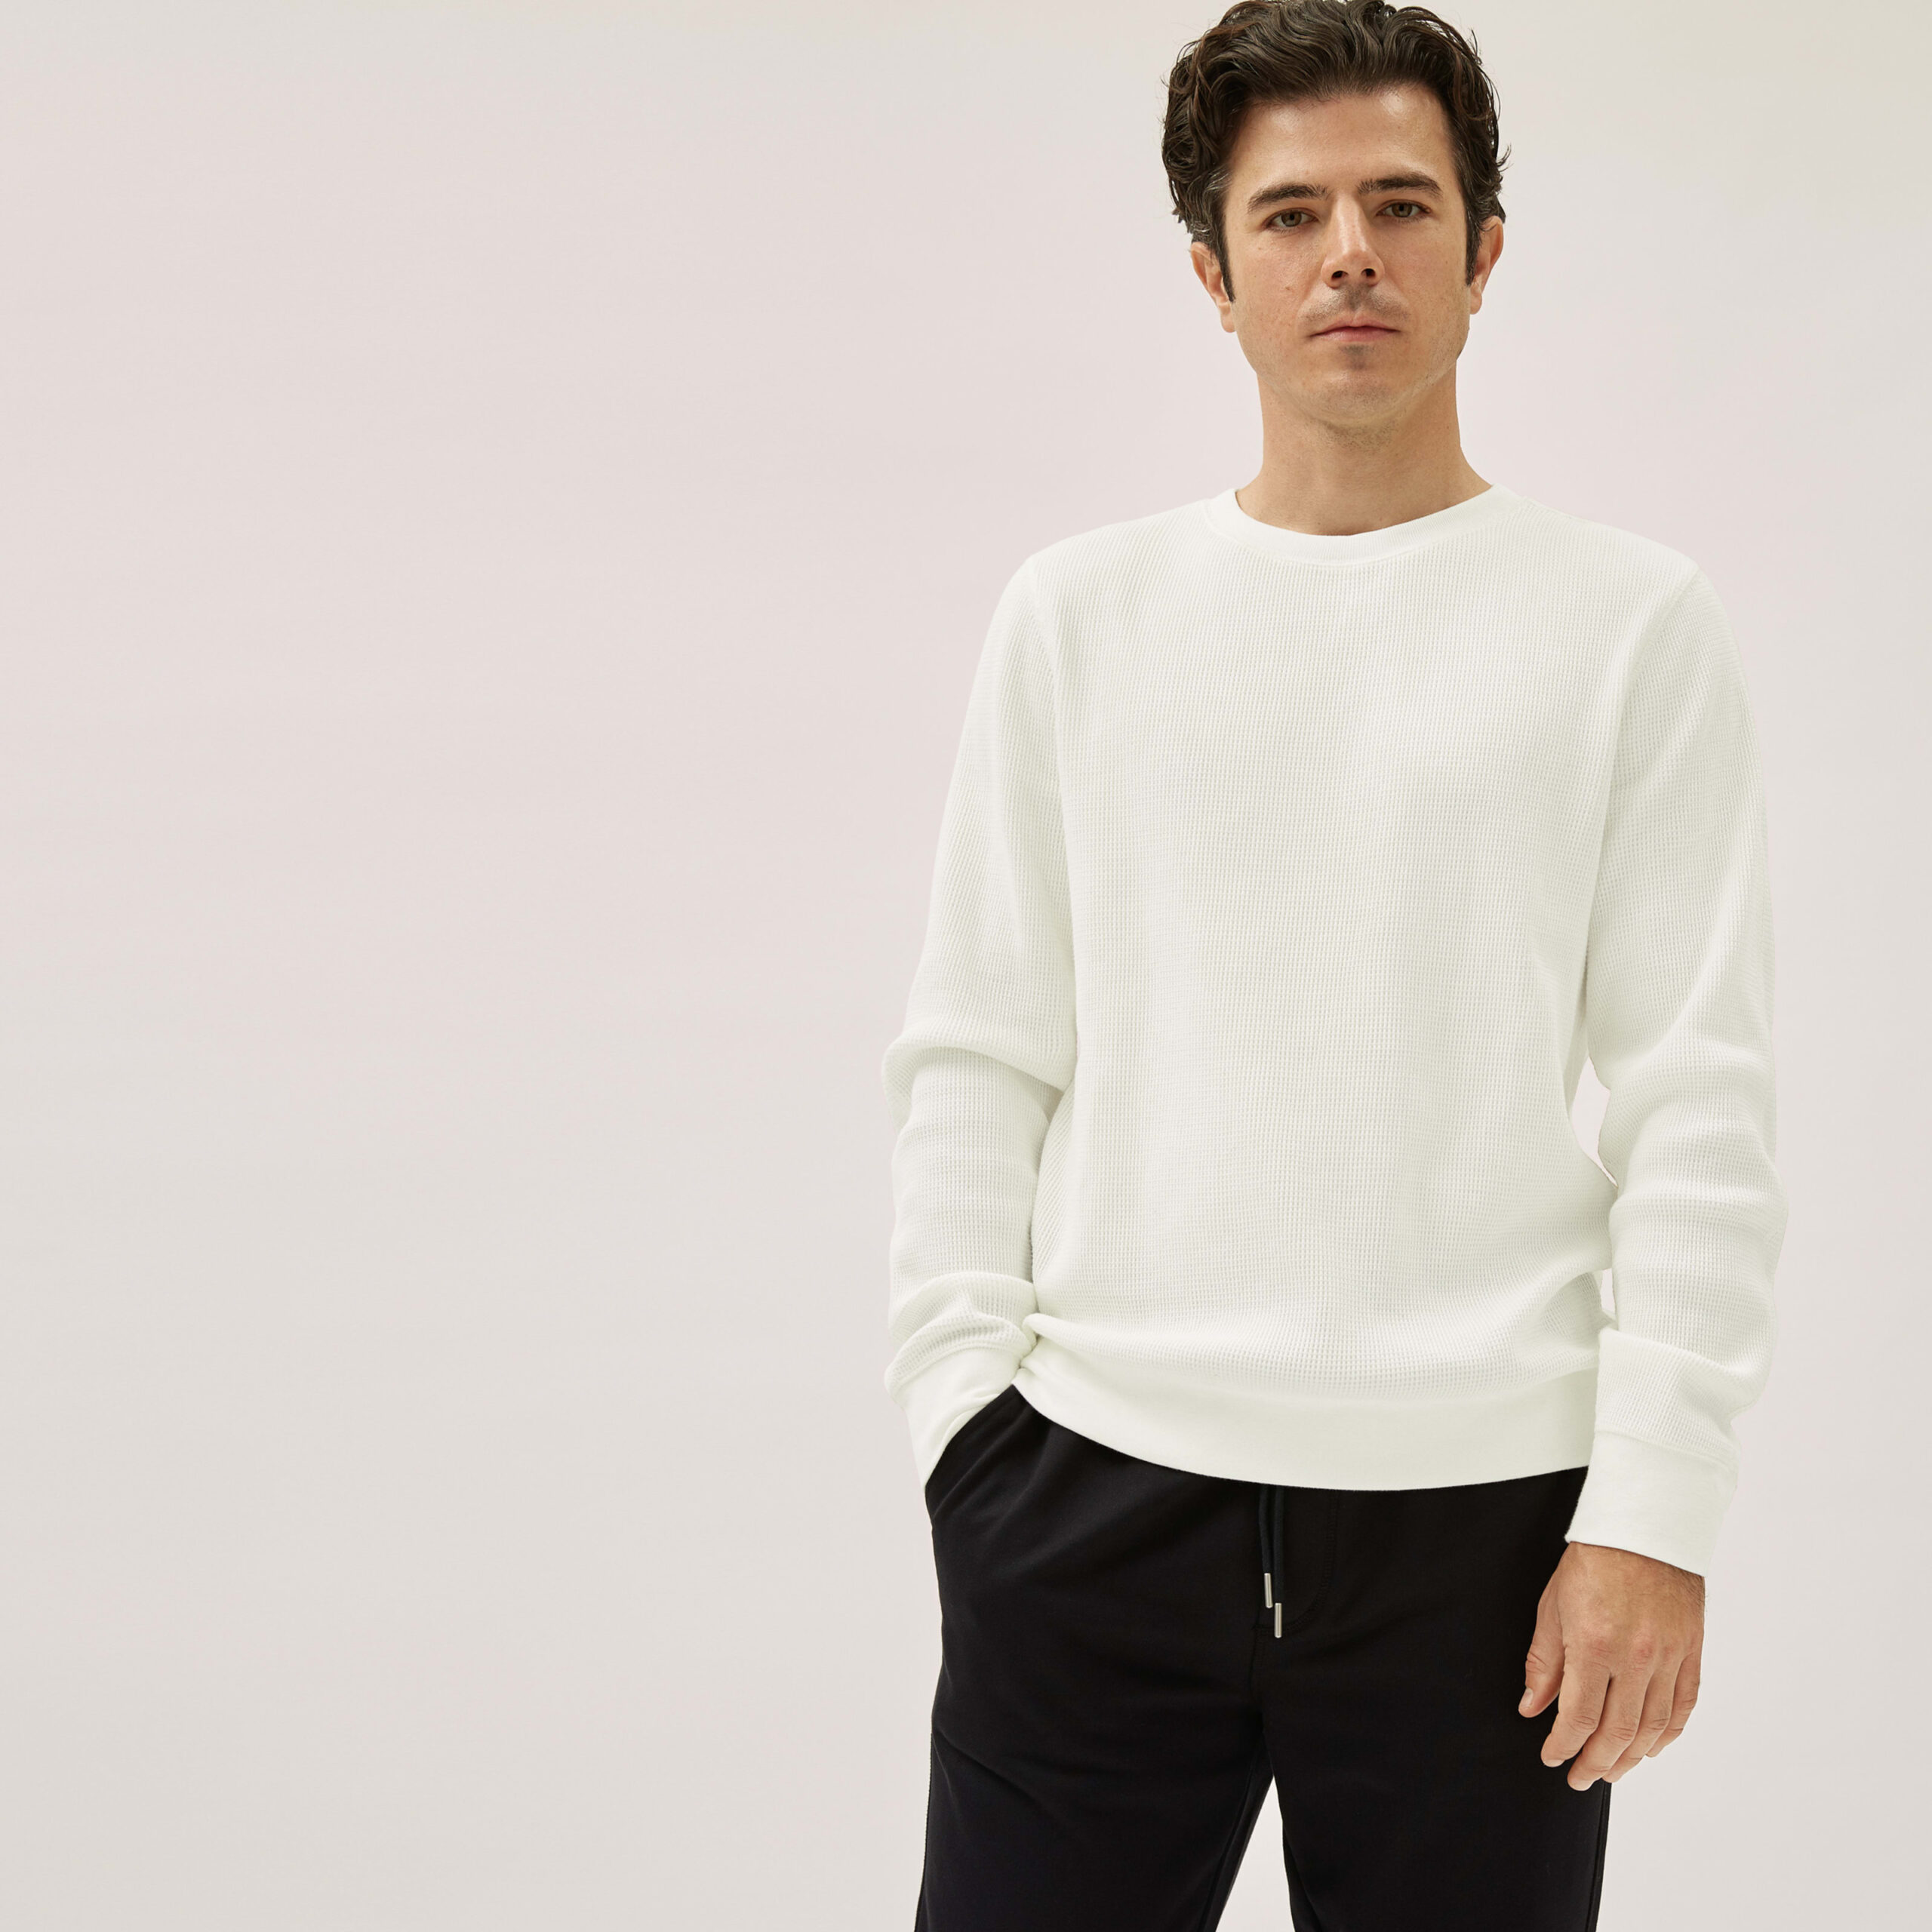 Men&#8217;s Waffle Long-Sleeve Crew T-Shirt by Everlane in Off White